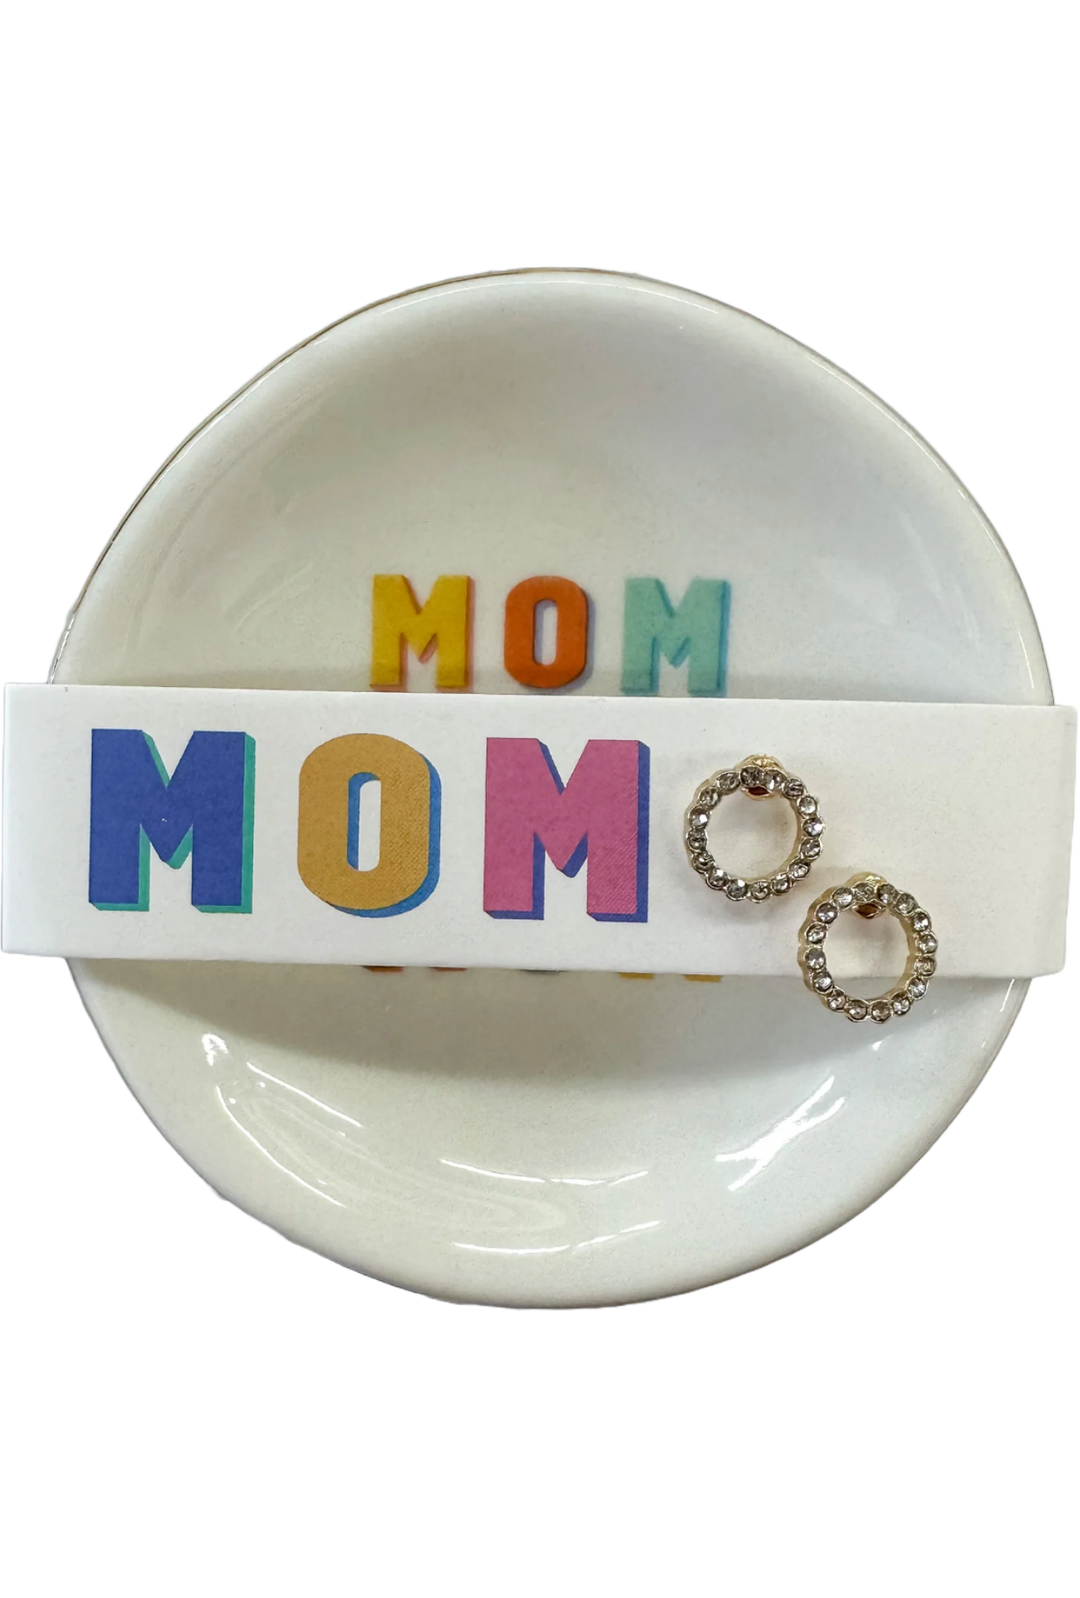 Mom Jewelry Dish and Earrings